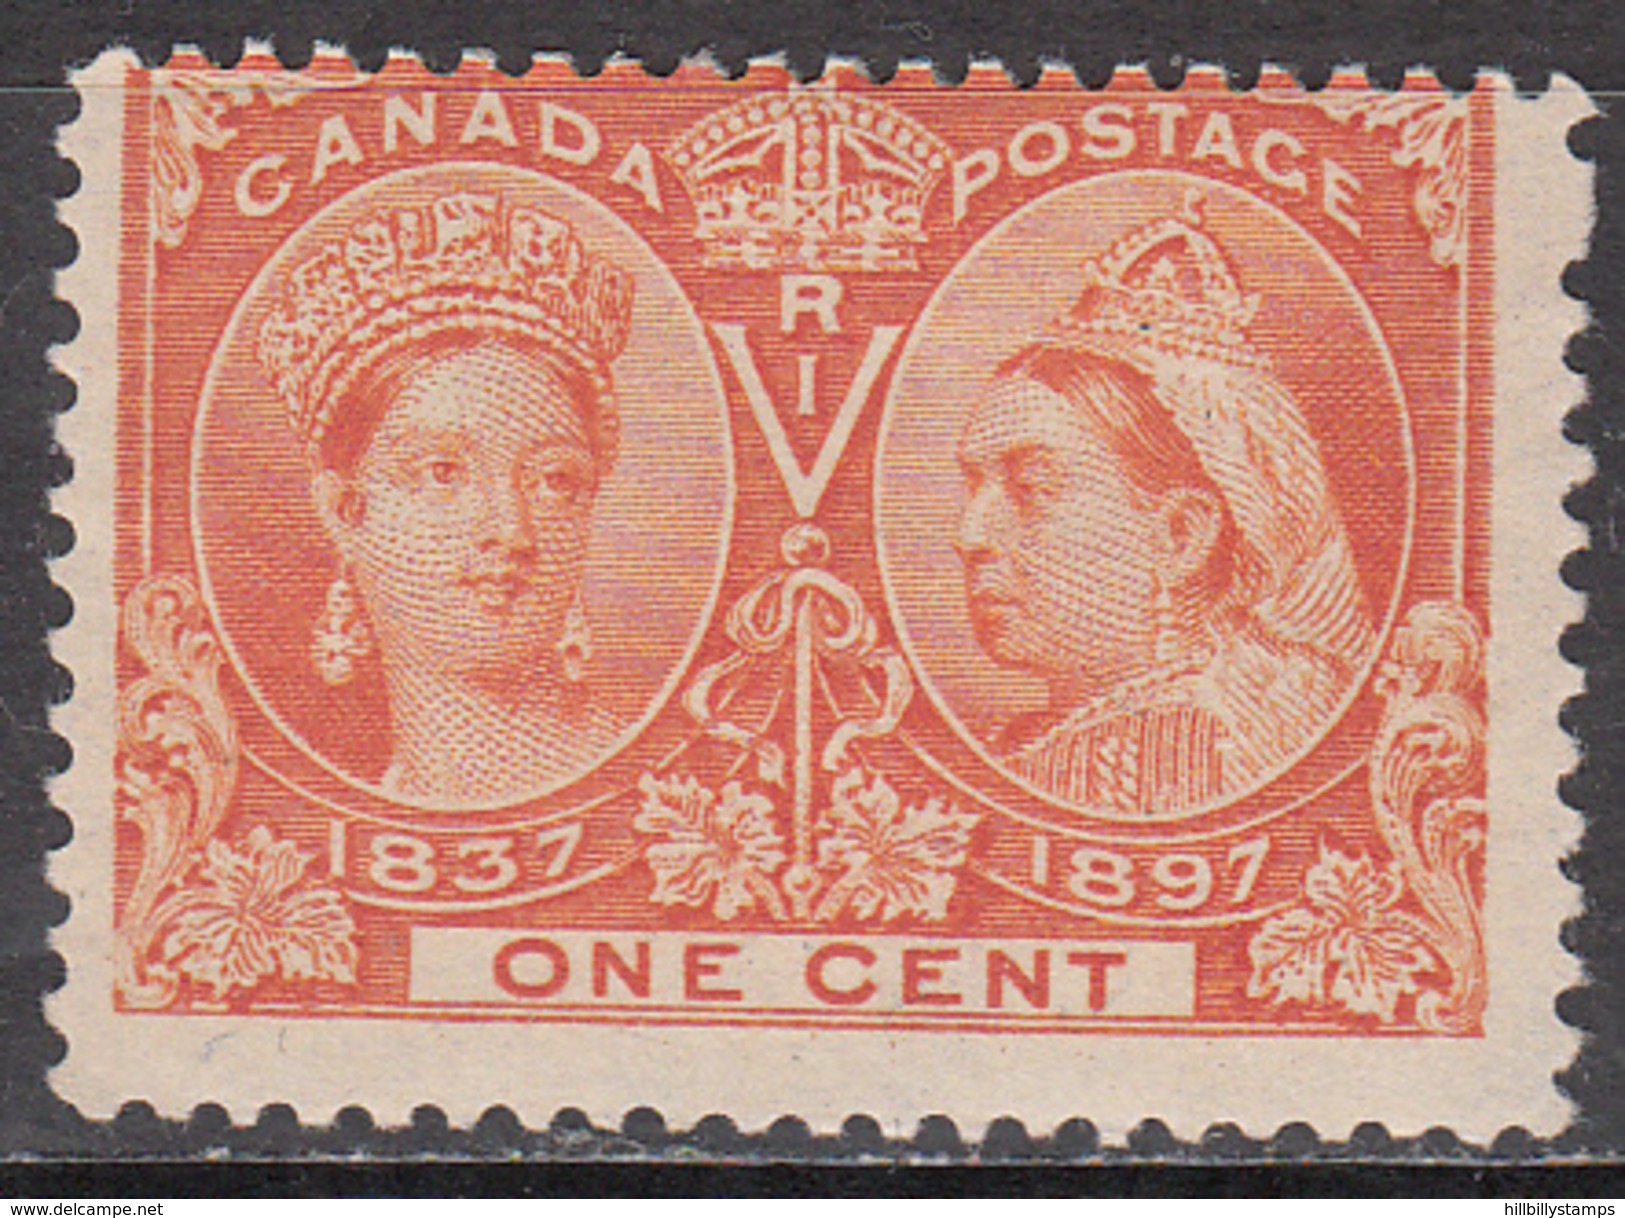 CANADA     SCOTT NO. 51    MINT HINGED     YEAR 1897 - Unused Stamps